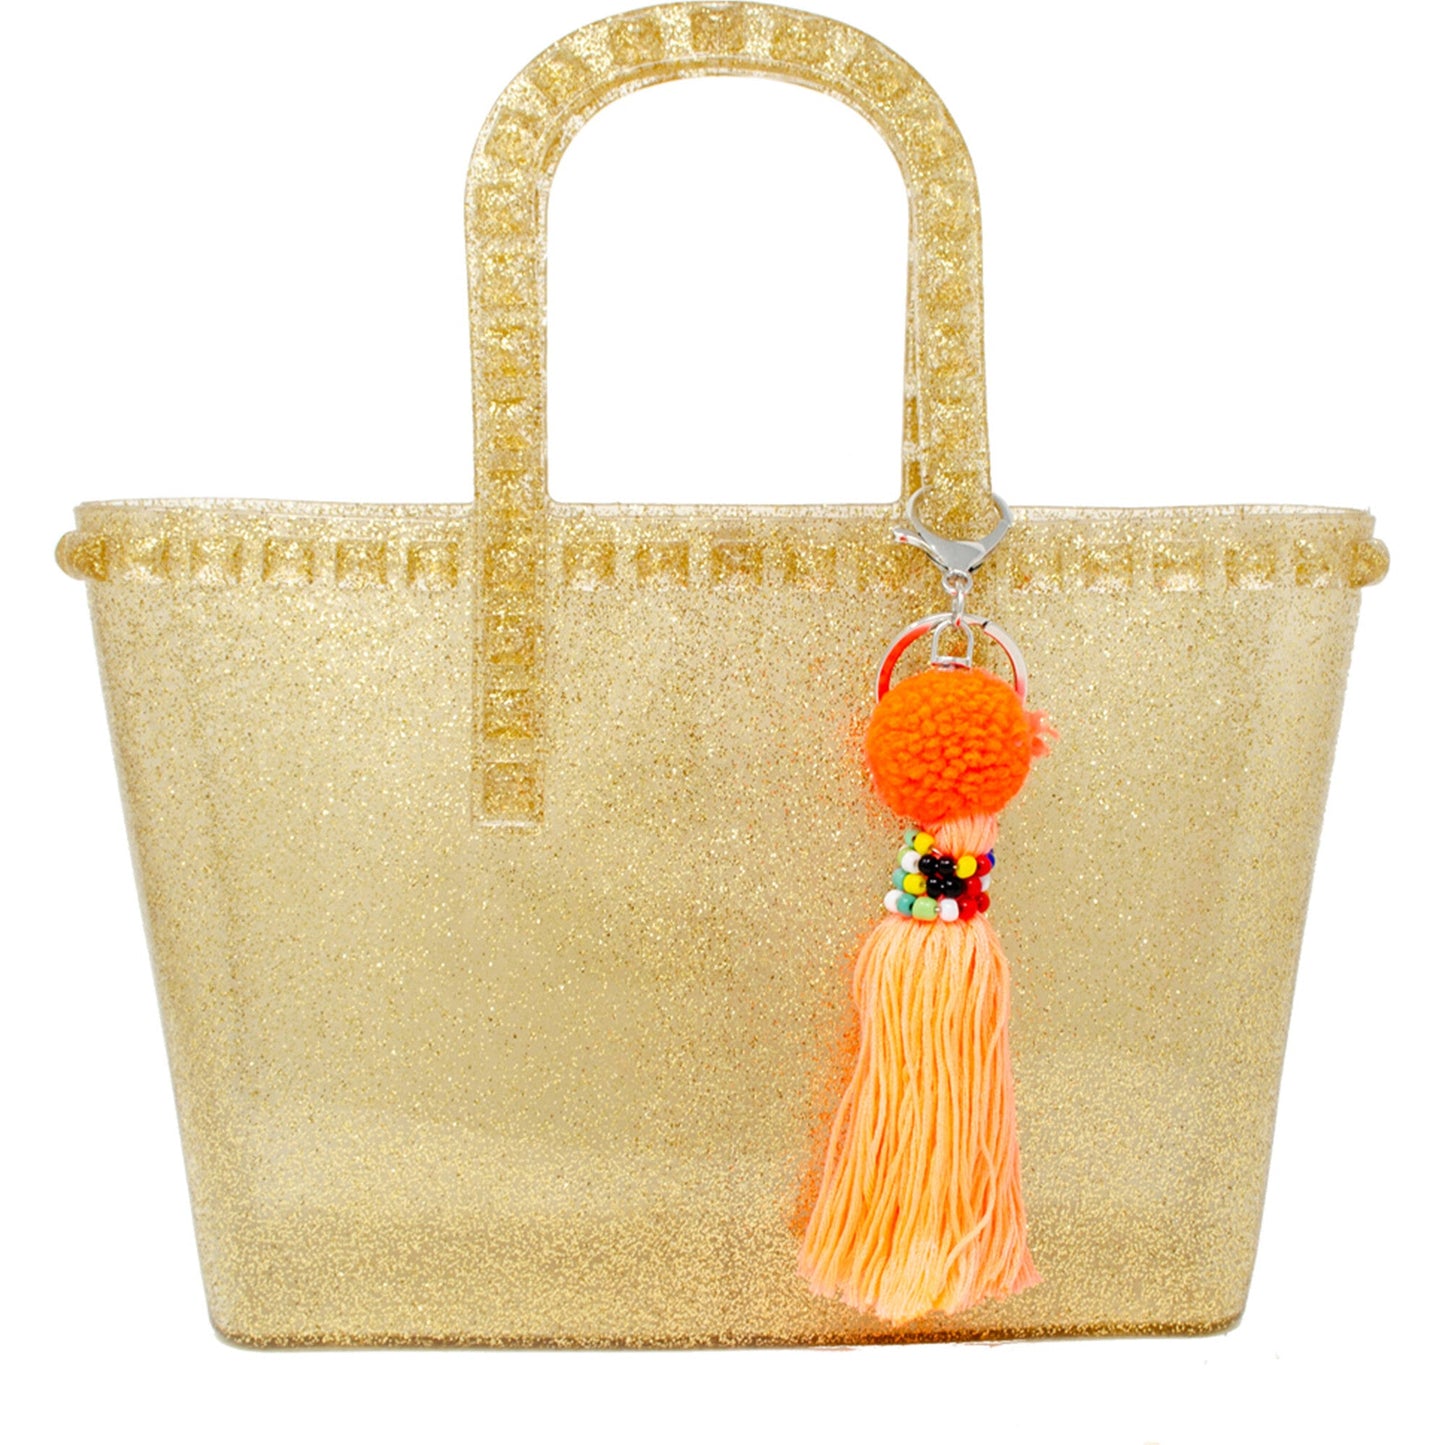 Zomi Gems - Tiny Jelly Tote Bag Gold